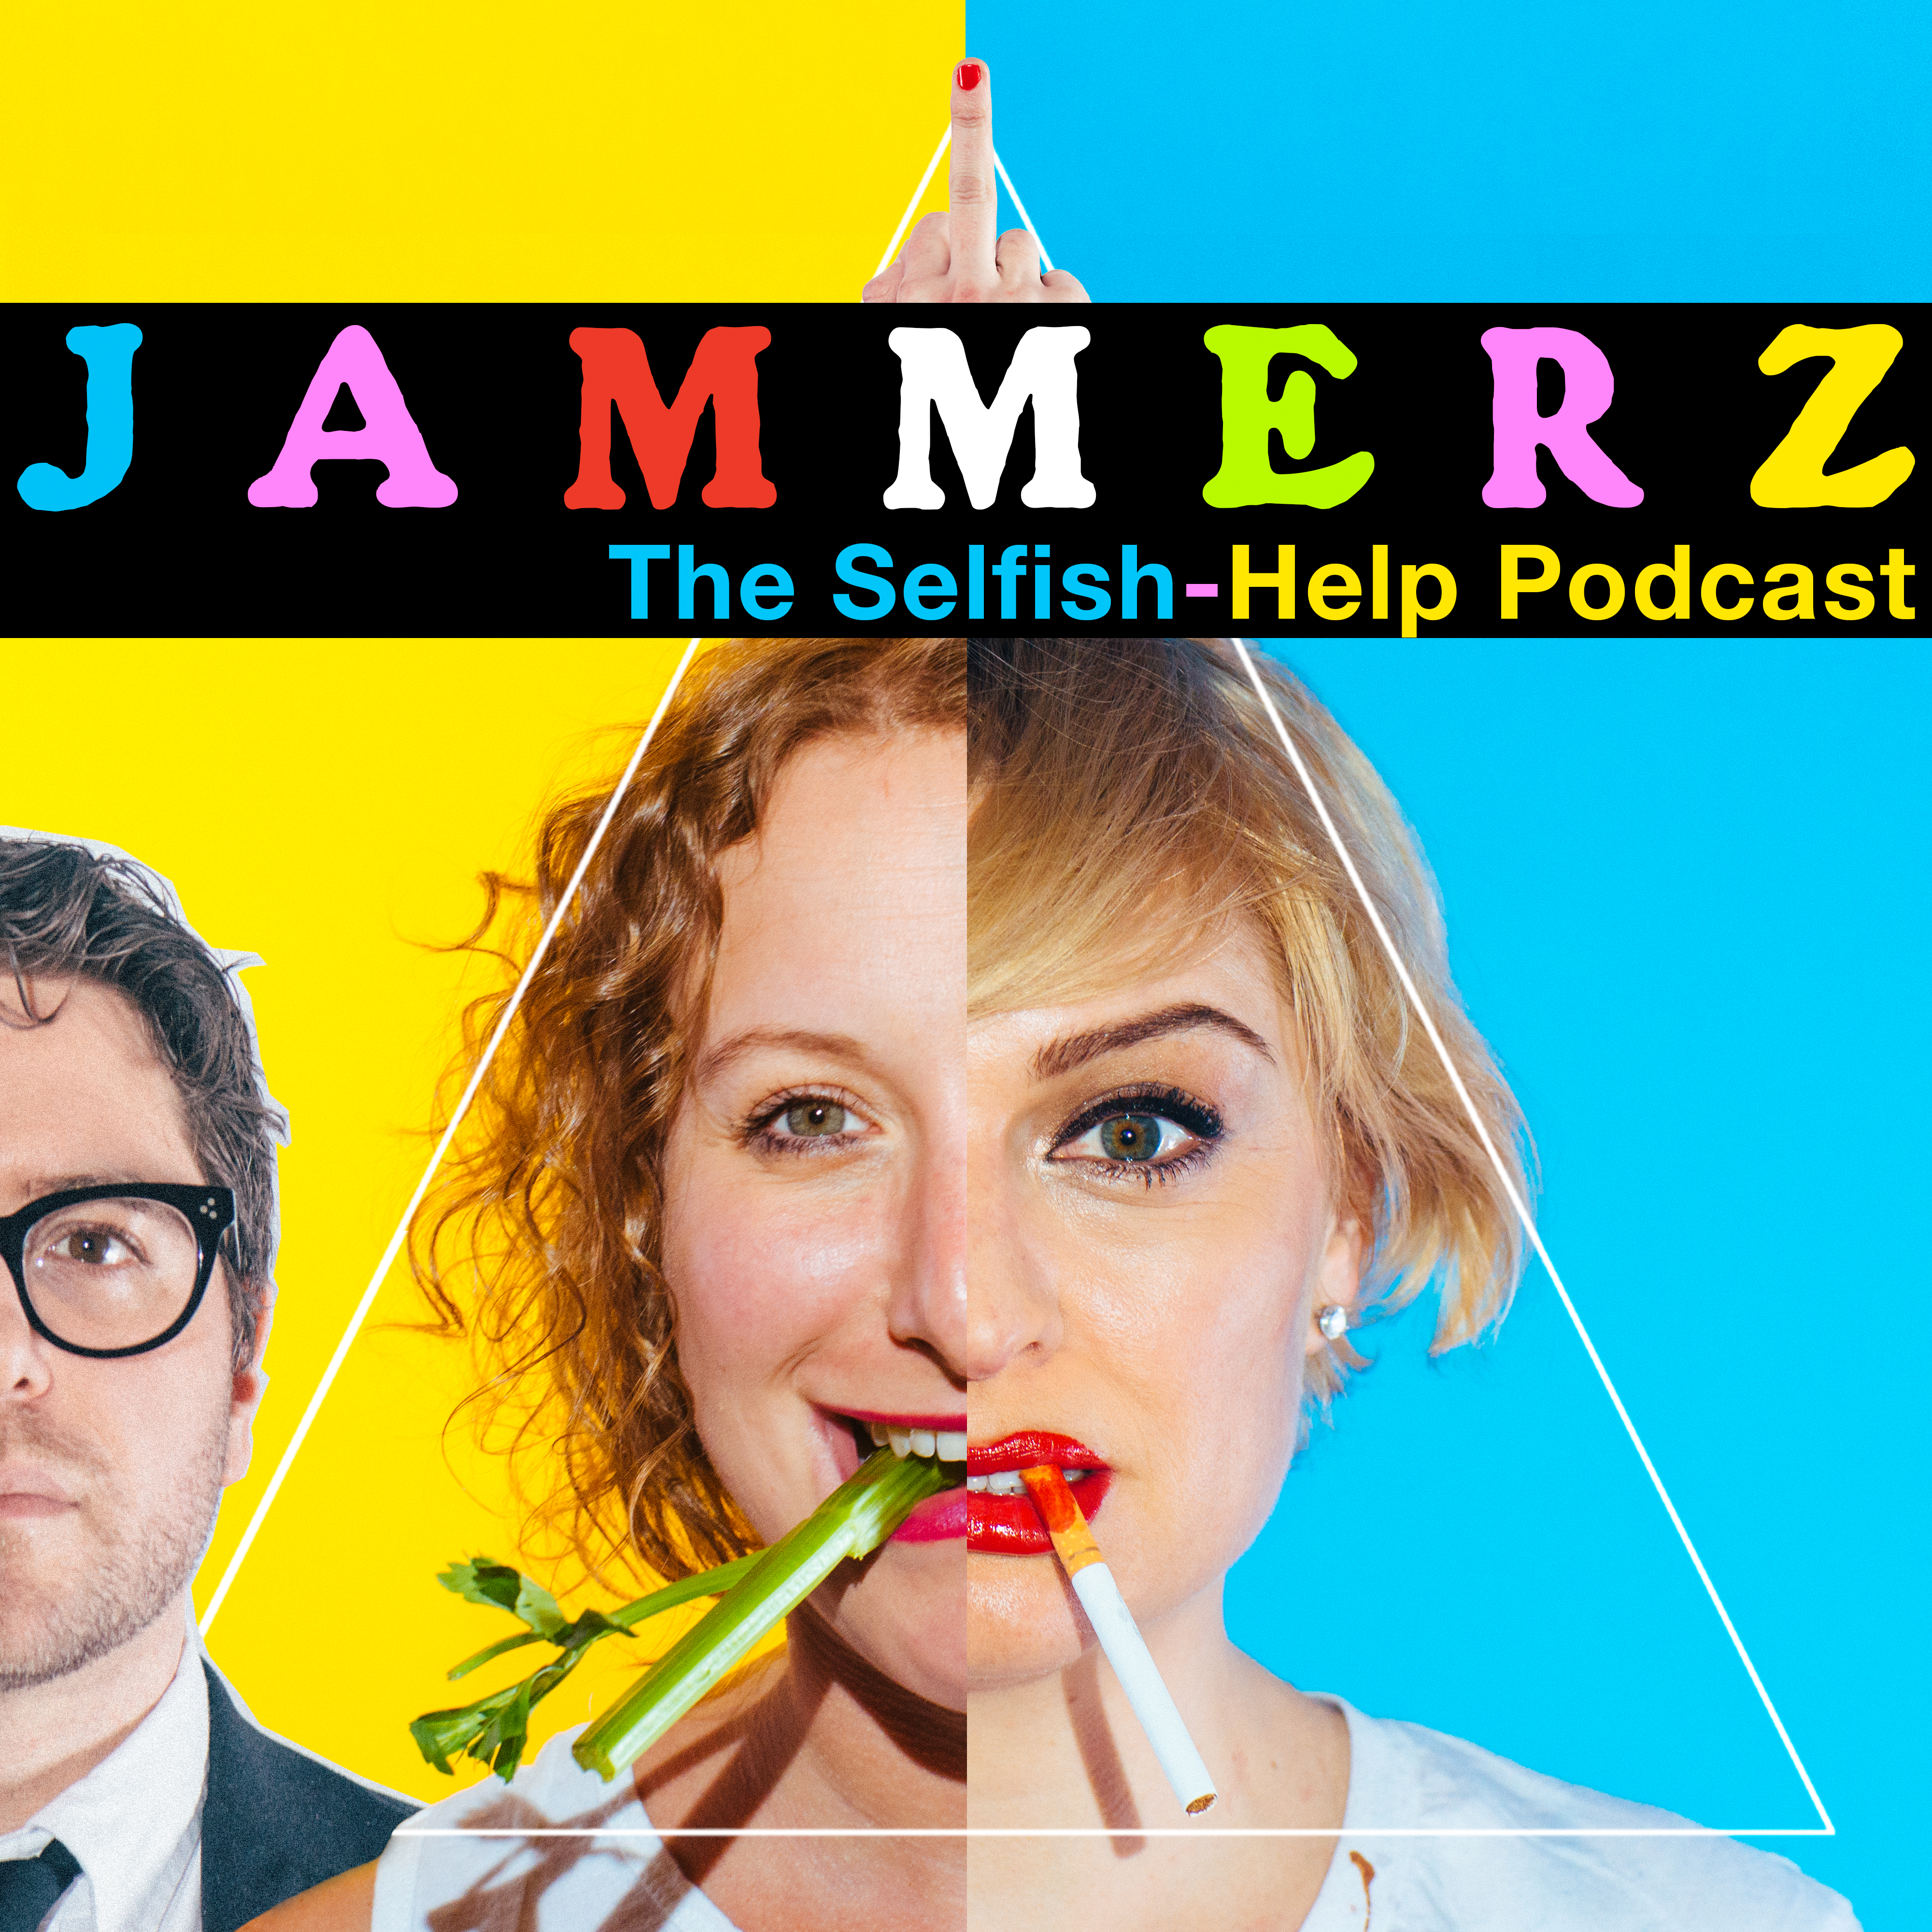 Jammerz Podcast Cover - Square